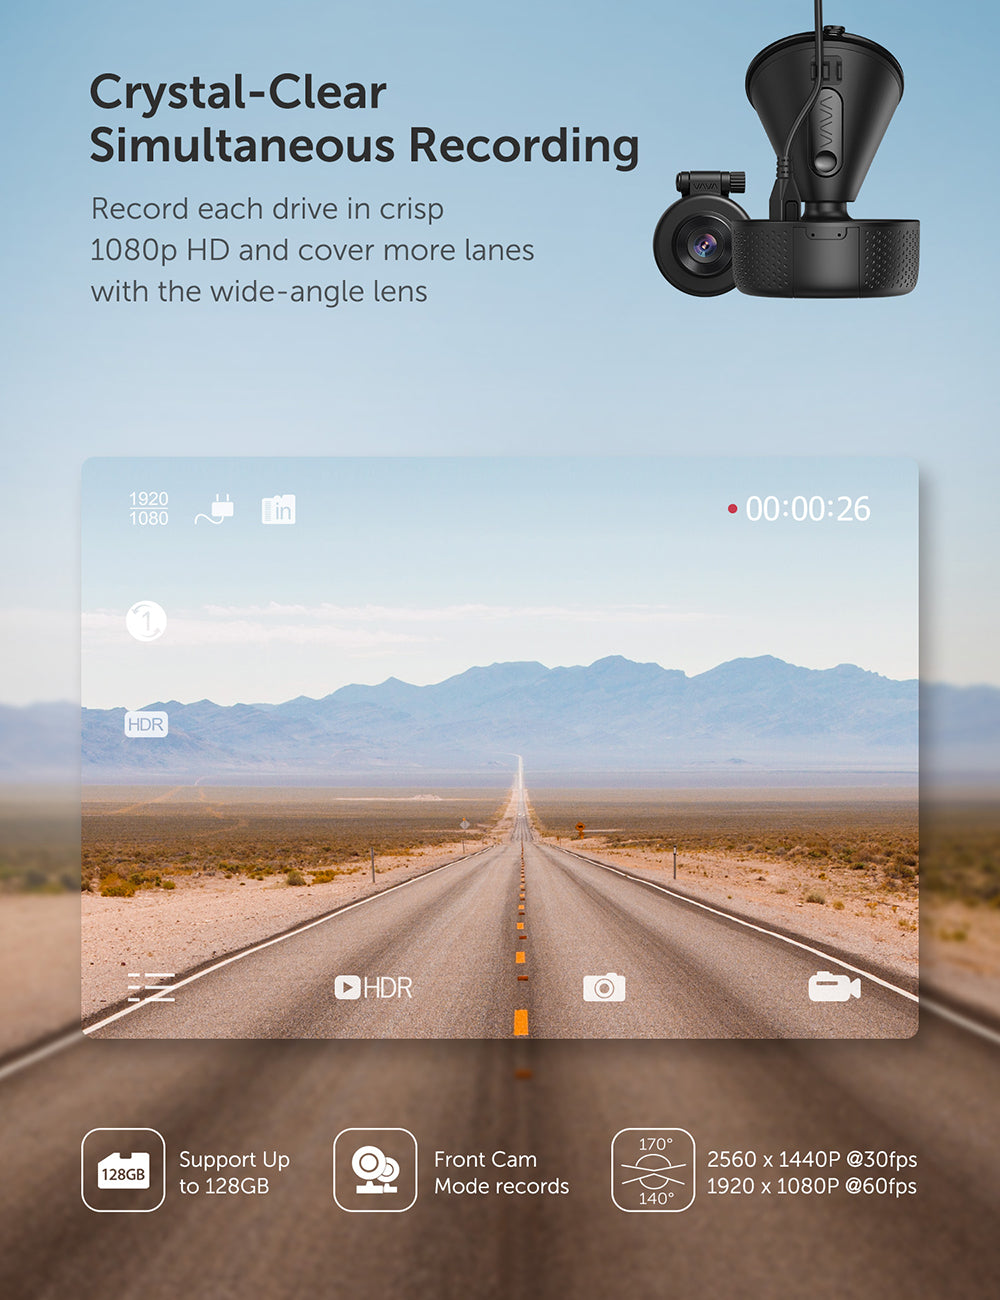 The VAVA 1080P Dual Dash Cam showing a desert road on the recording screen